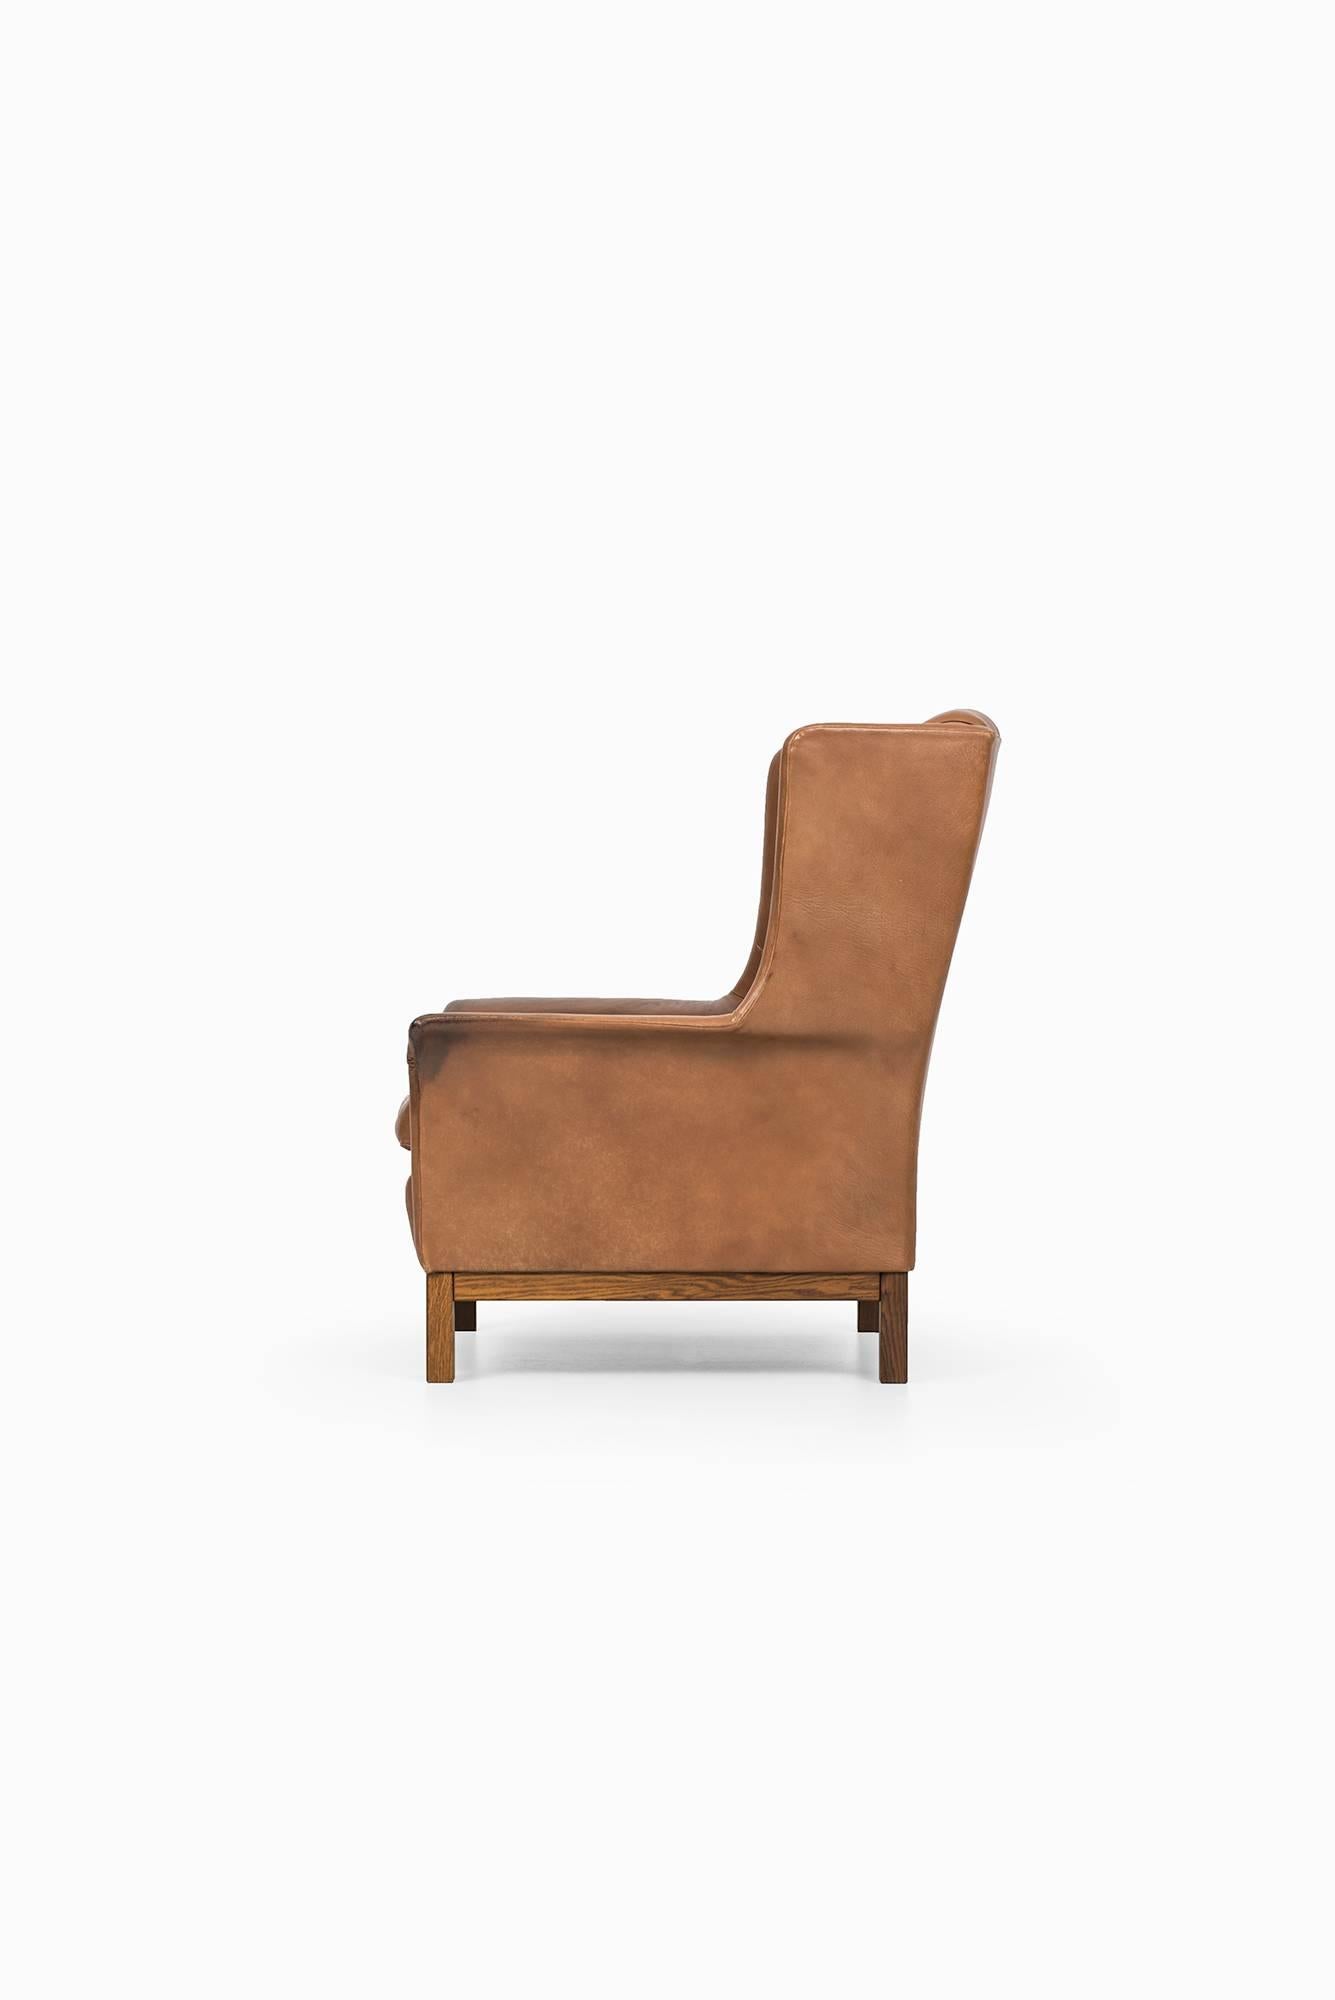 Swedish Arne Norell Easy Chair Produced by Arne Norell AB in Sweden